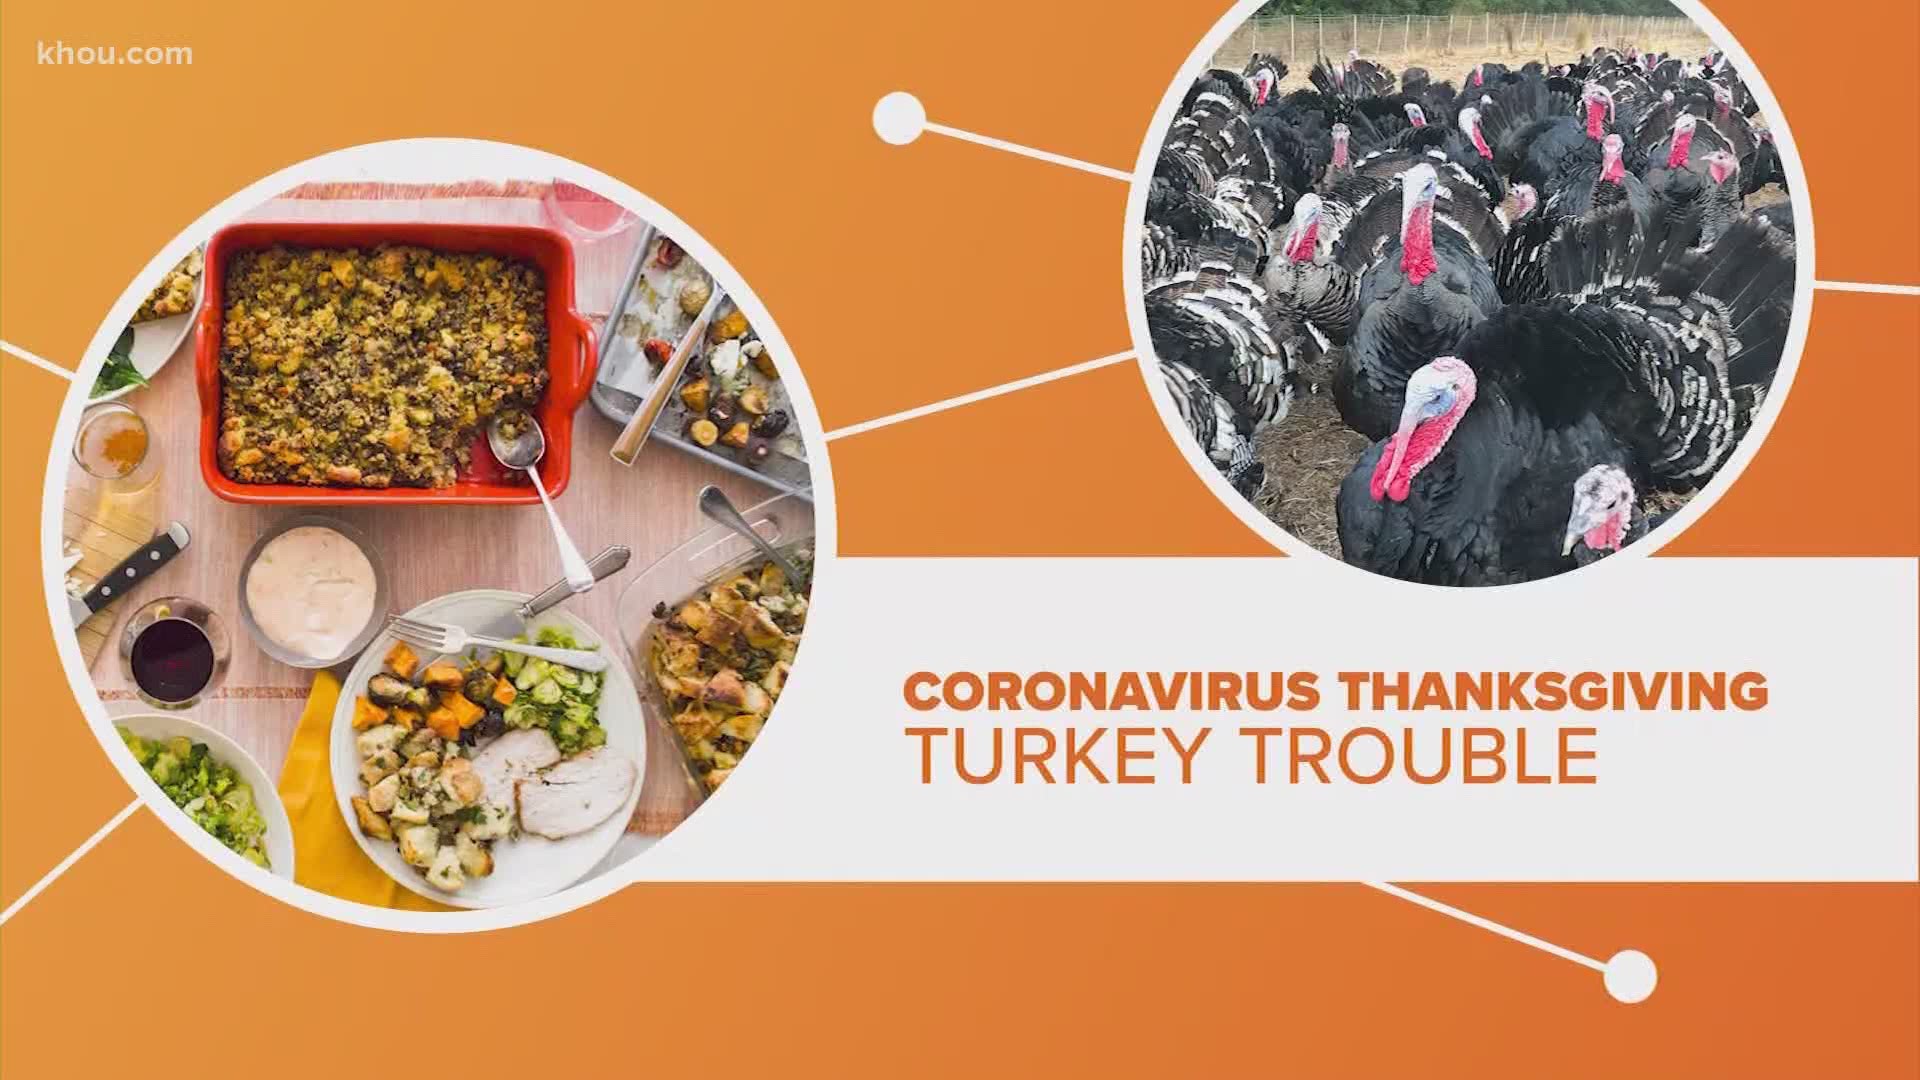 Turkey trouble. The coronavirus pandemic has forced us to switch up our holiday traditions, including how we approach Thanksgiving dinner.